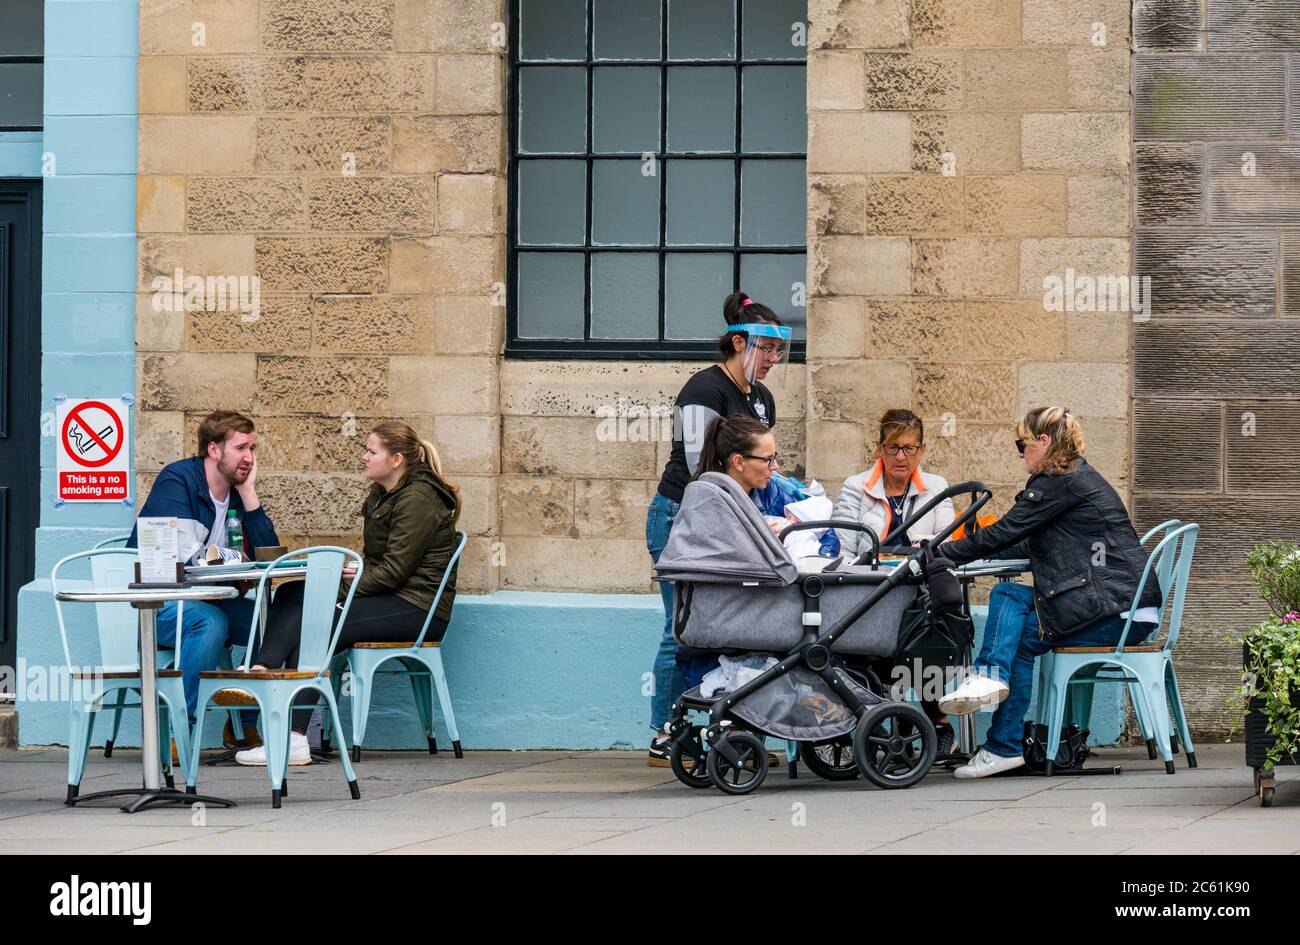 Leith, Edinburgh, Scotland, United Kingdom, 6th July 2020. Cafe culture & pub opening begin: cafes and pubs along The Shore are beginning to offer pavement spaces for meals and drinks and the area feels much busier than in recent months. Pub beer gardens and outdoor spaces can open from today in Scotland. Customers sitting outside at Mimi's Bakehouseare served by a waitress wearing a visor Stock Photo